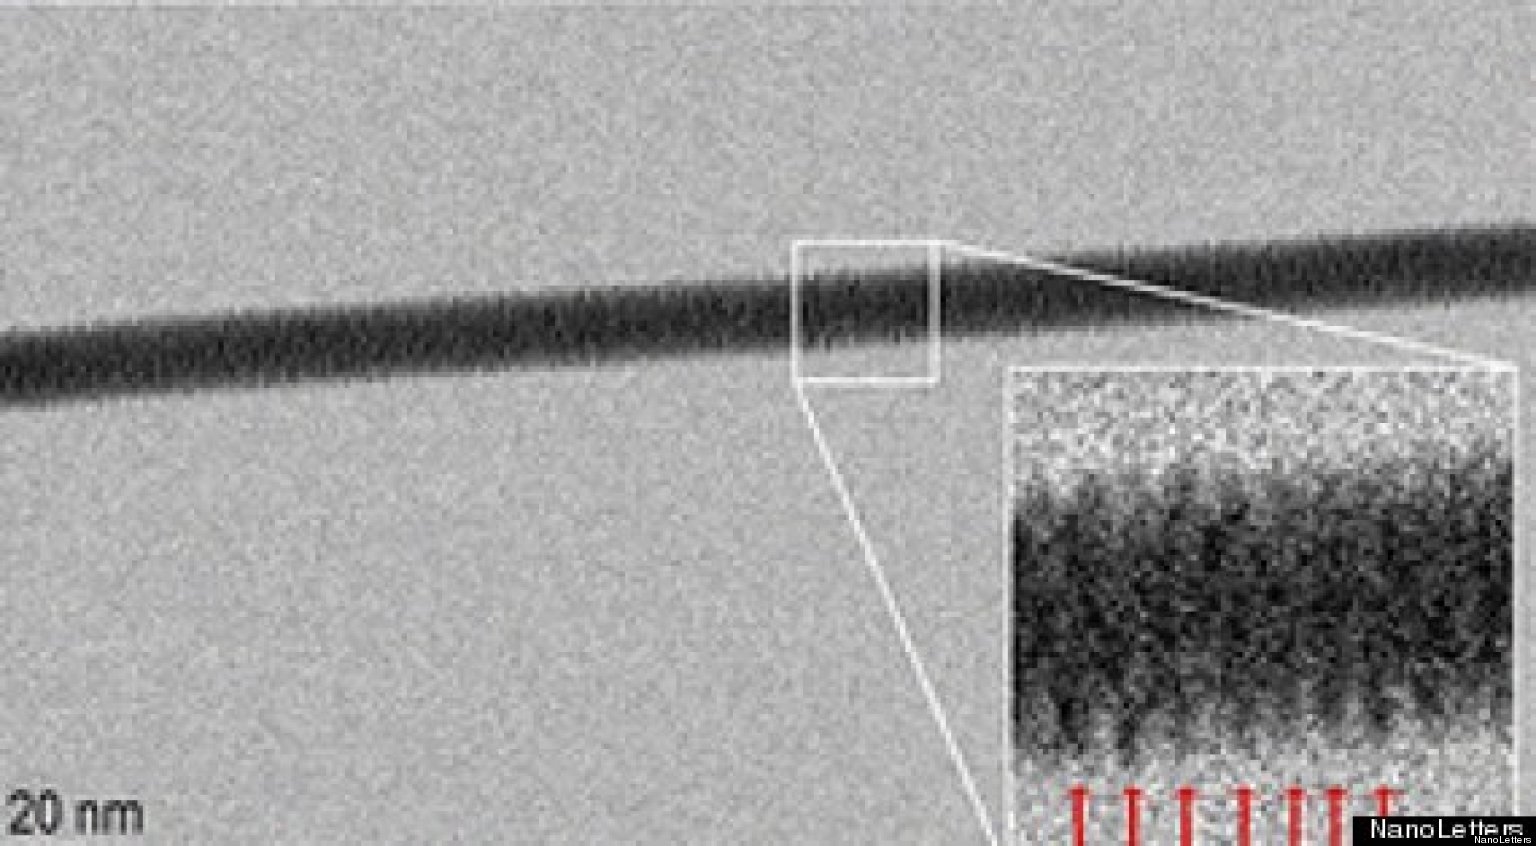 DNA Photo Shows Double Helix For The First Time (PHOTOS) | HuffPost